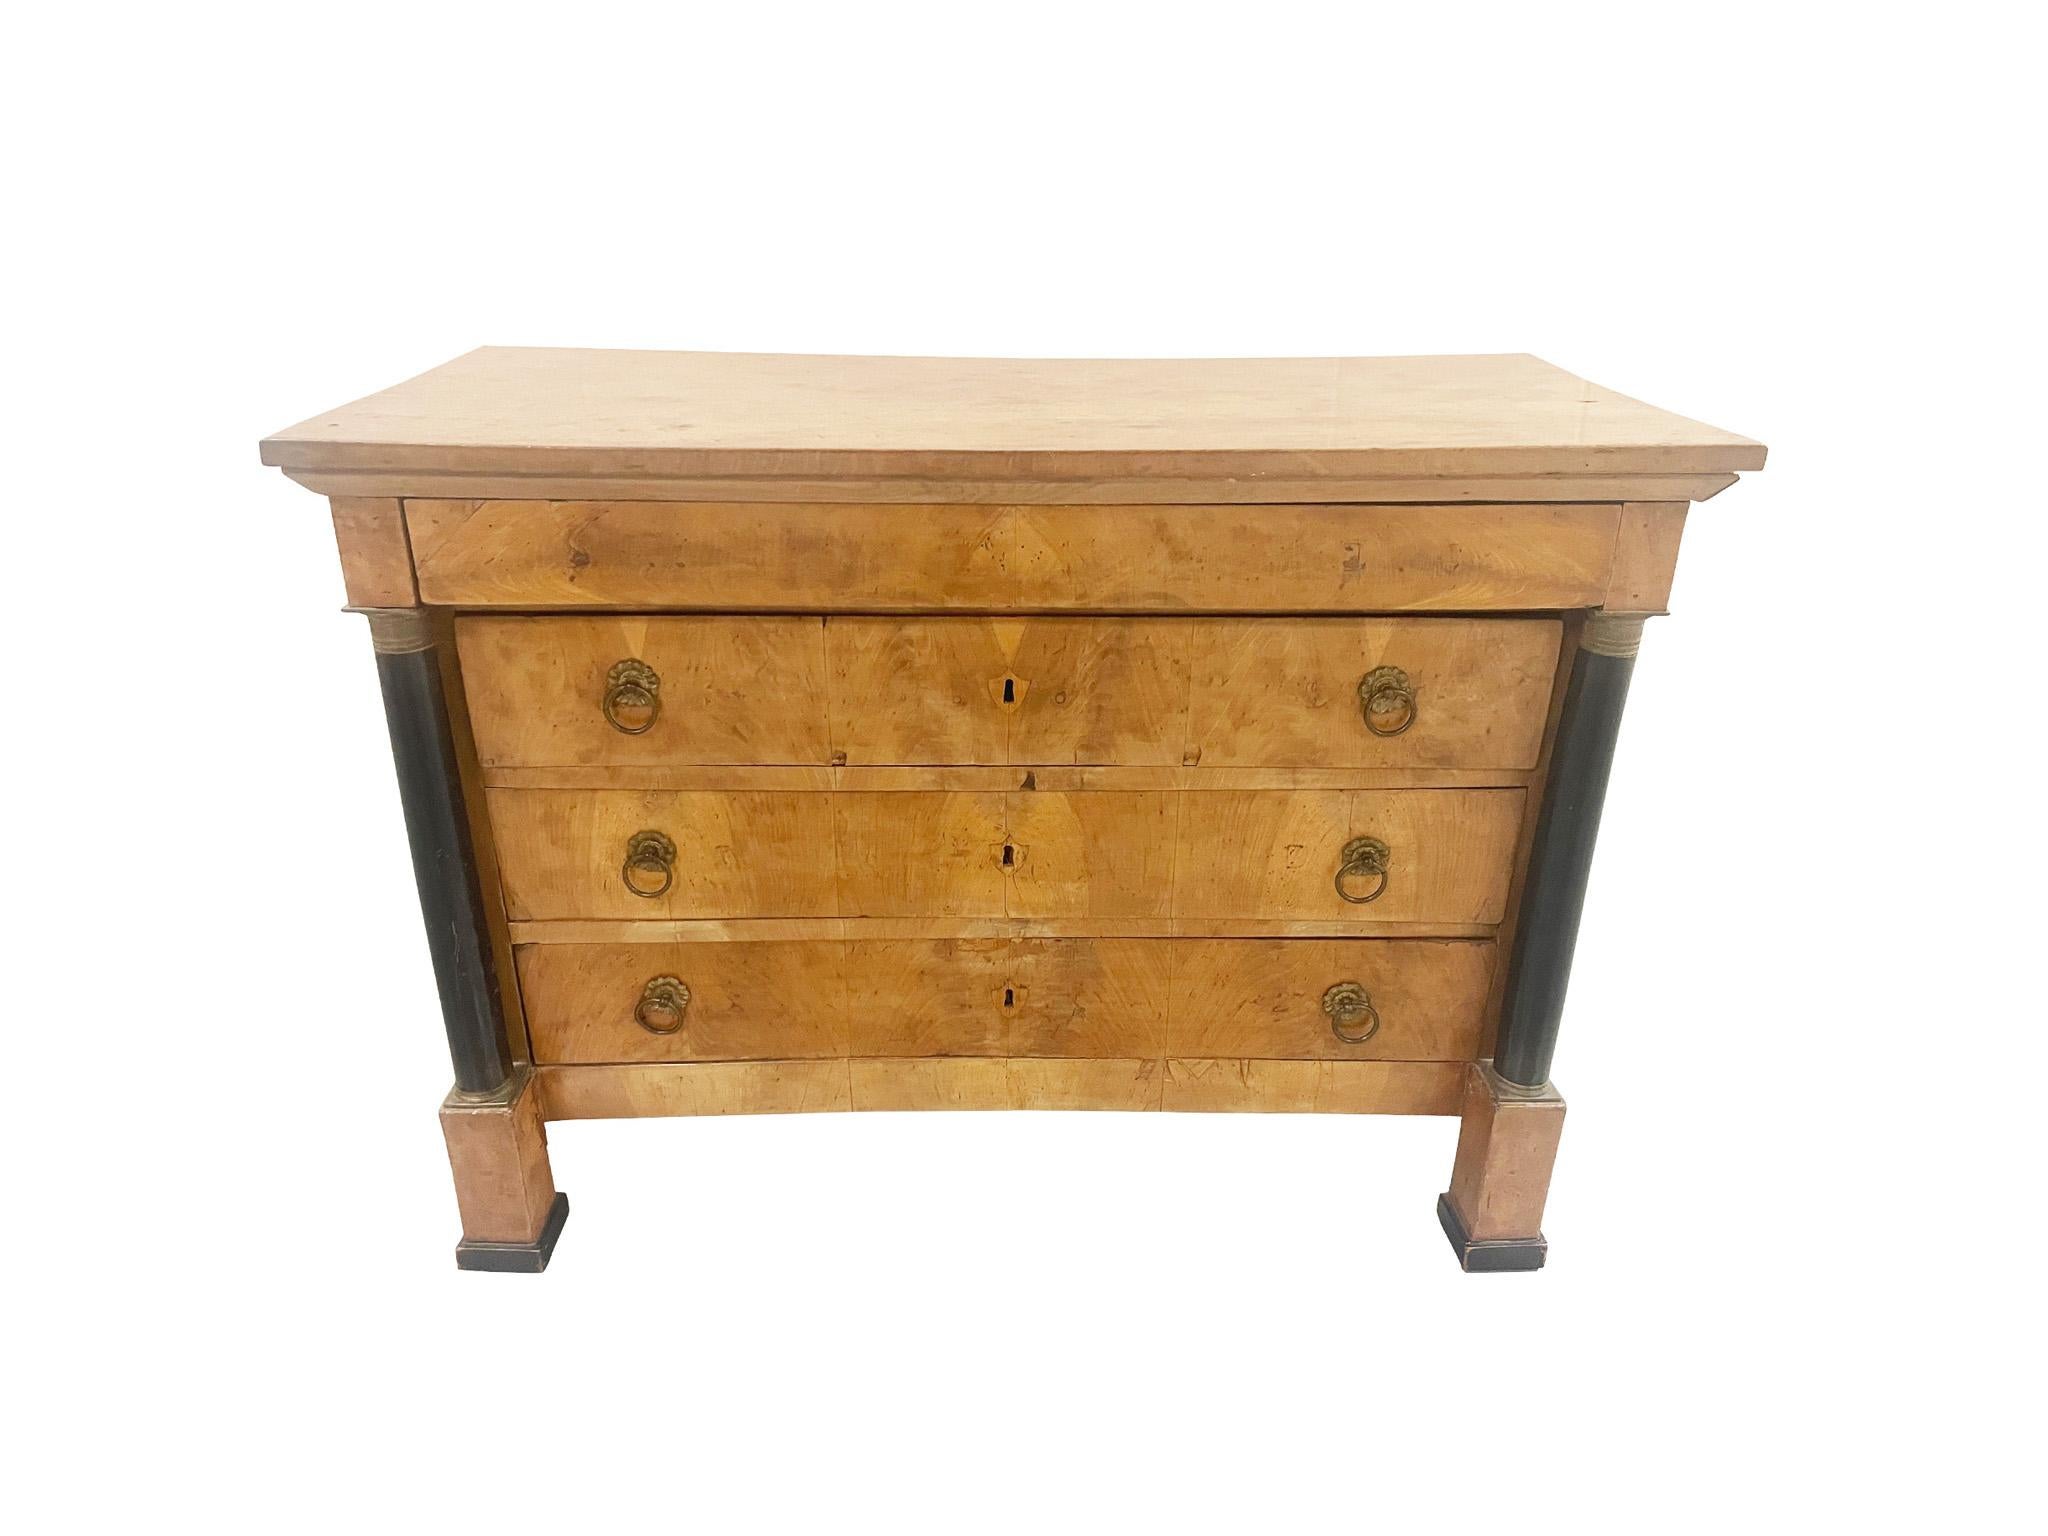 Hand-Crafted Early 19th Century Biedermeier Chest of Drawers